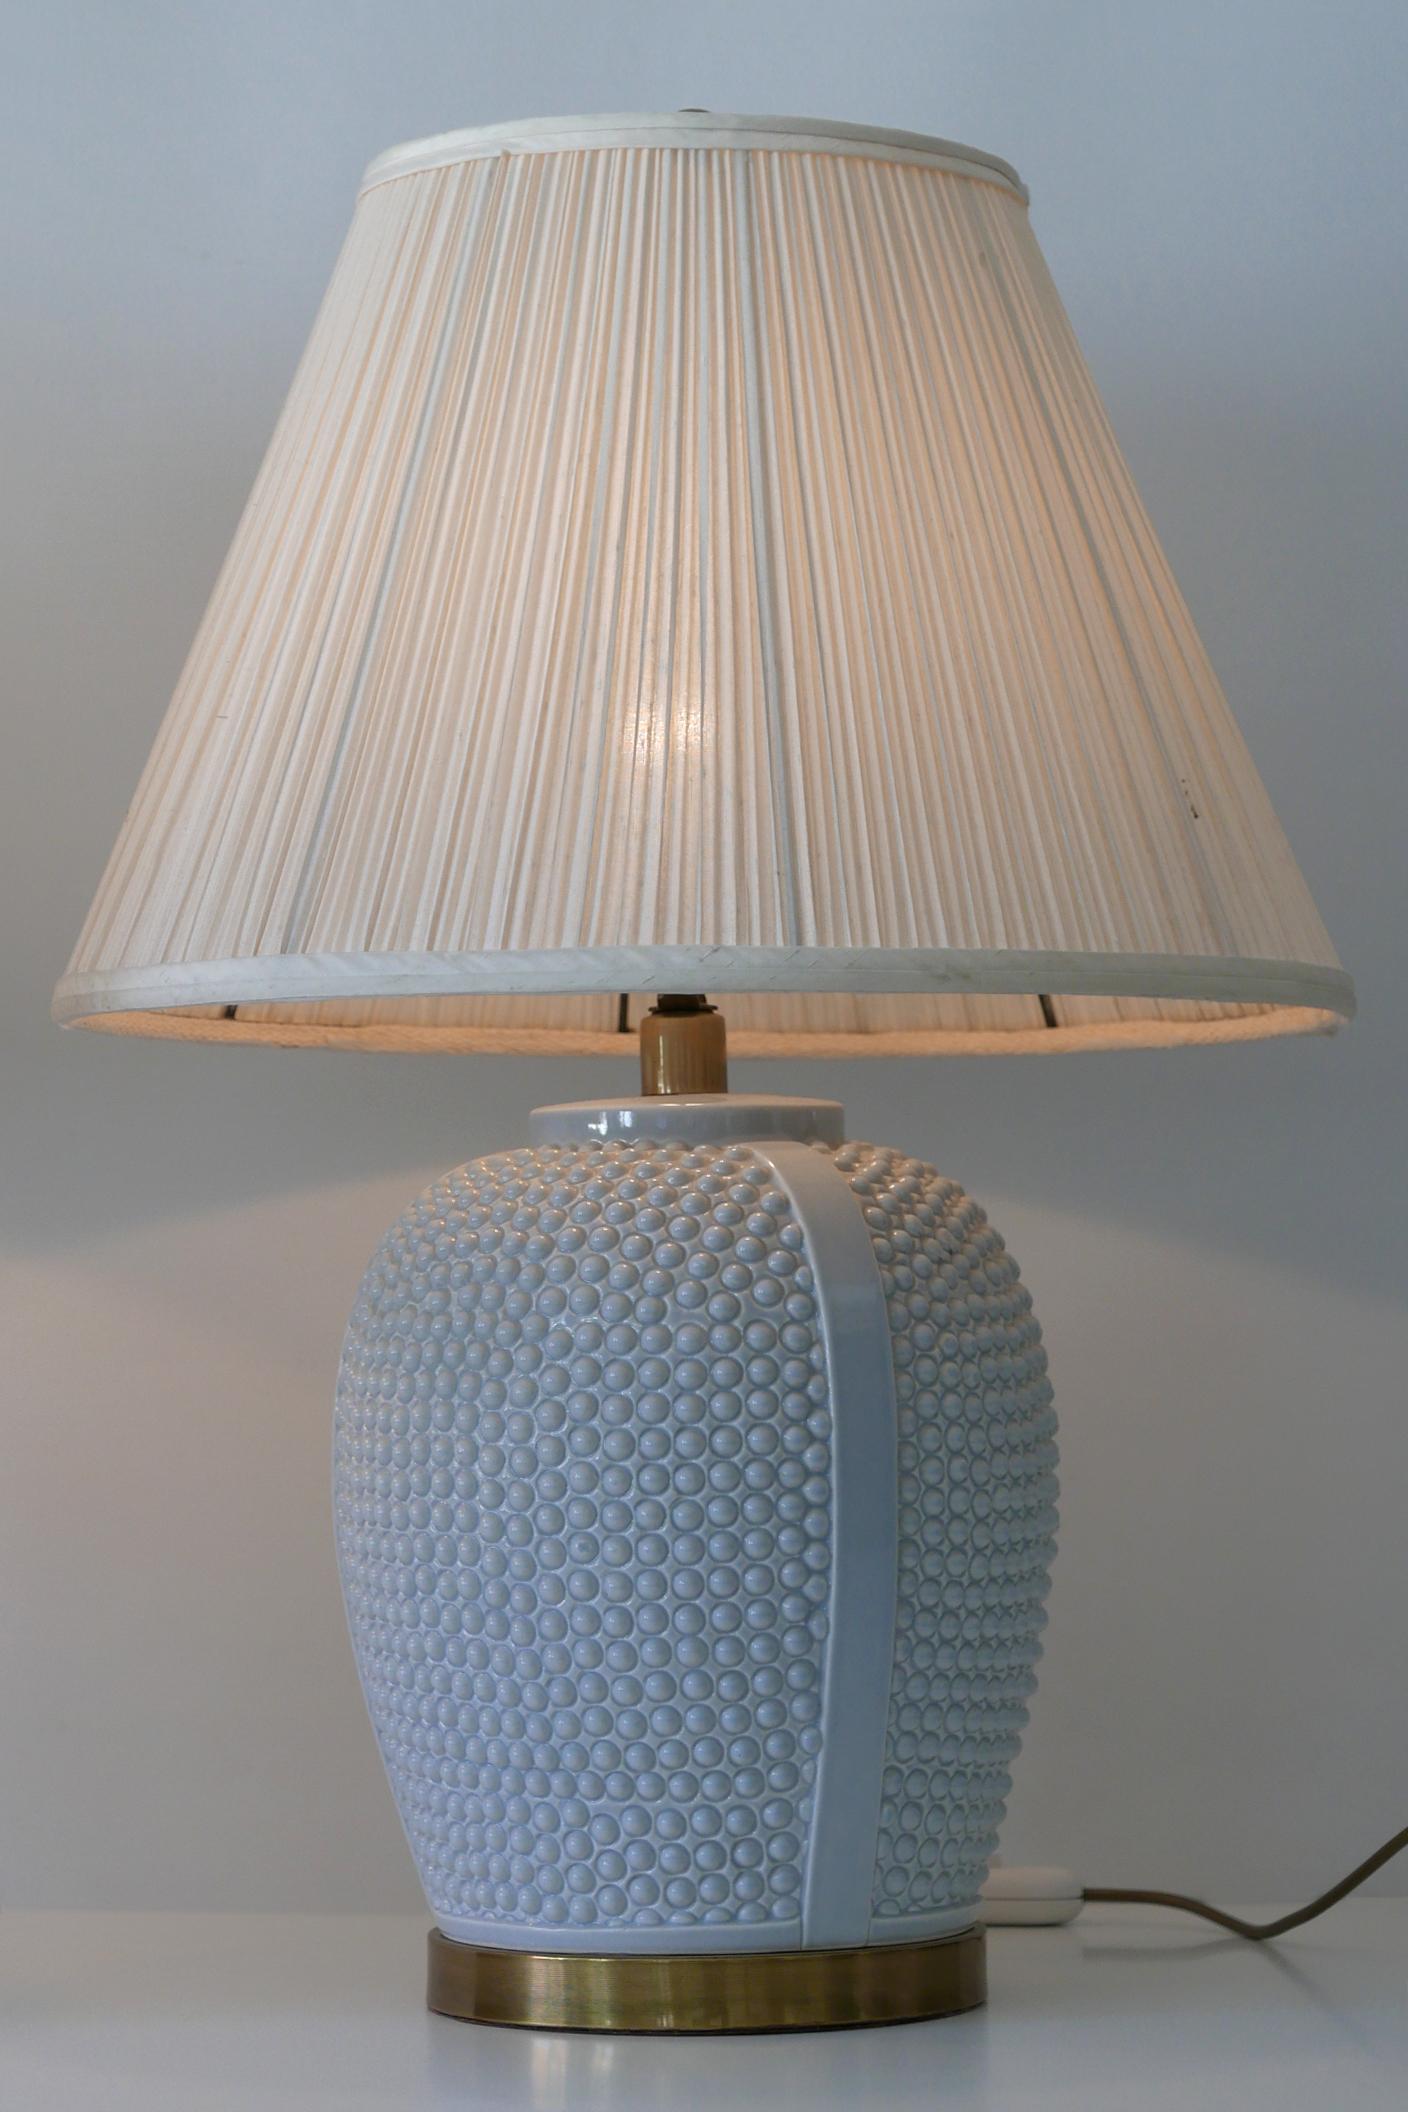 Set of Two Exceptional Mid-Century Modern Ceramic Table Lamps, 1960s, Germany For Sale 1